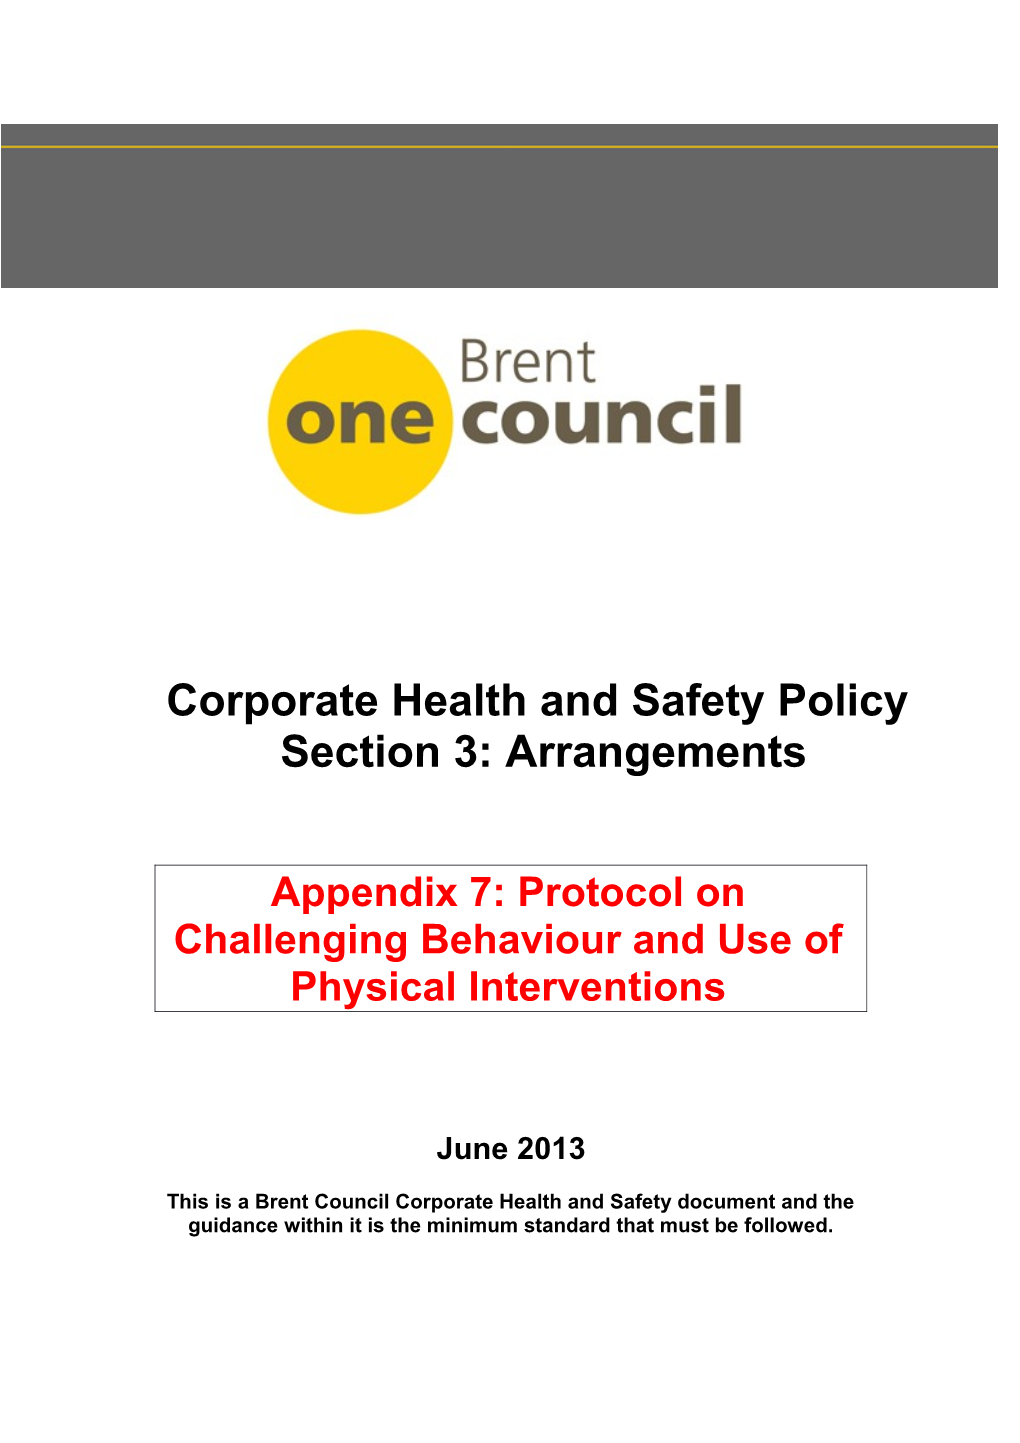 Protocol on Challenging Behaviour and the Use of Physical Interventions April 2012